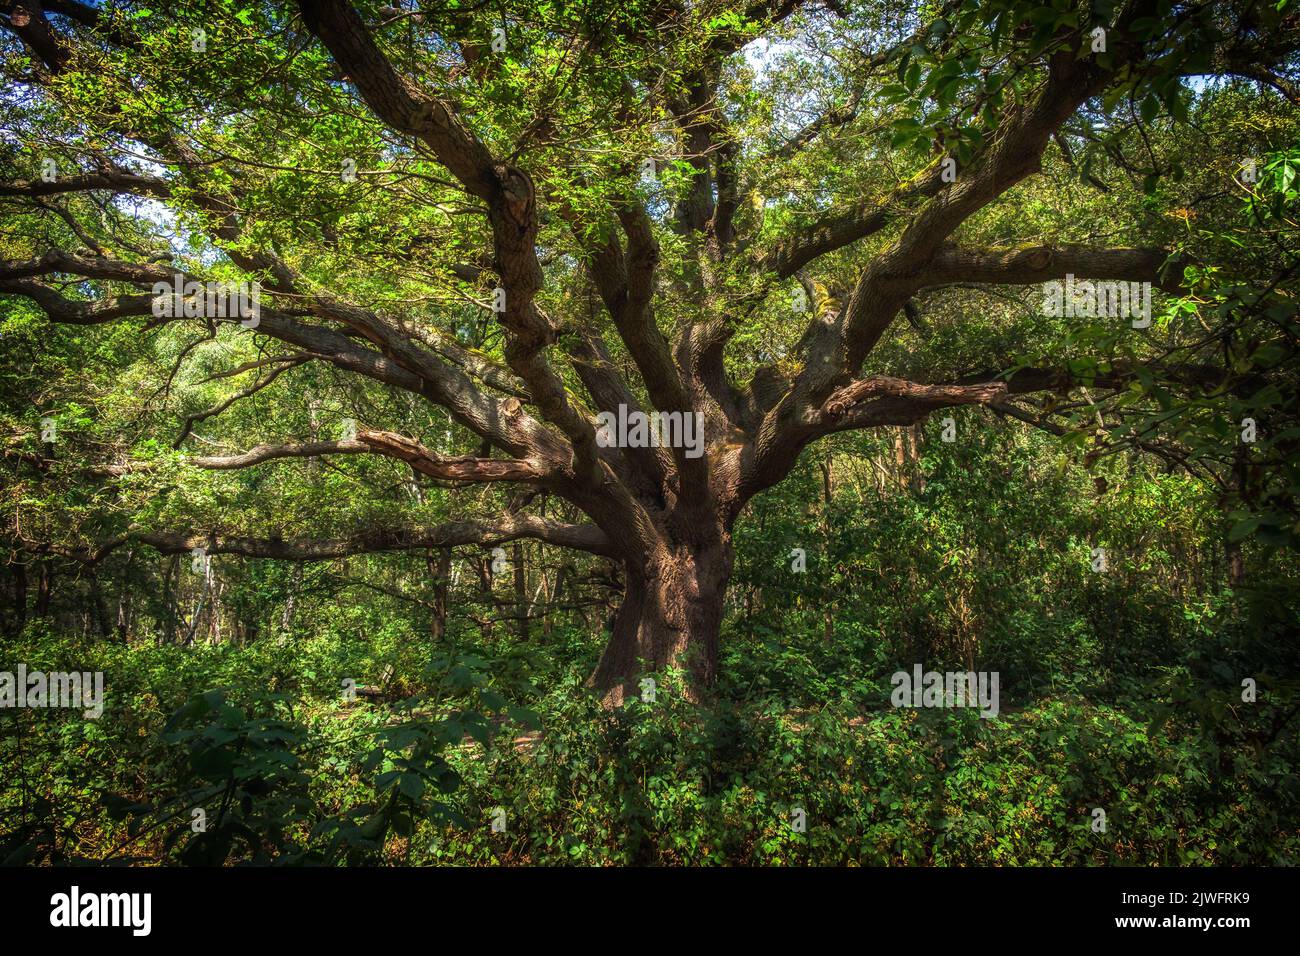 View of a tree surrounded by a dense vegetation in Wimbledon Common Stock Photo